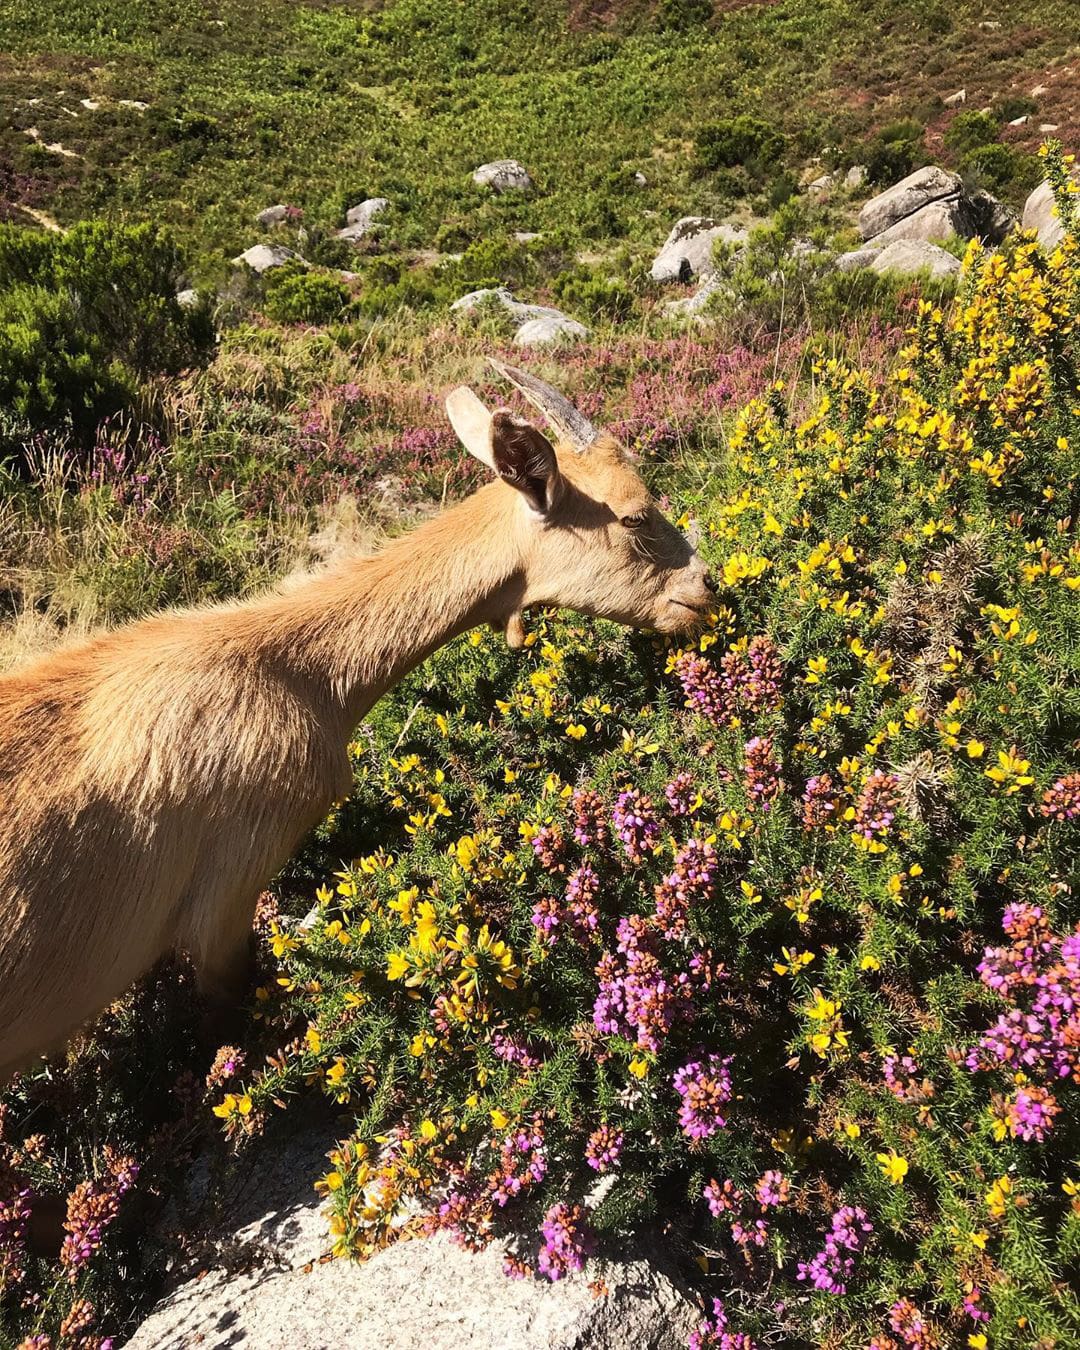 If you are lucky, you can spot the Ibex, a wild mountain goat, roam the national park. 